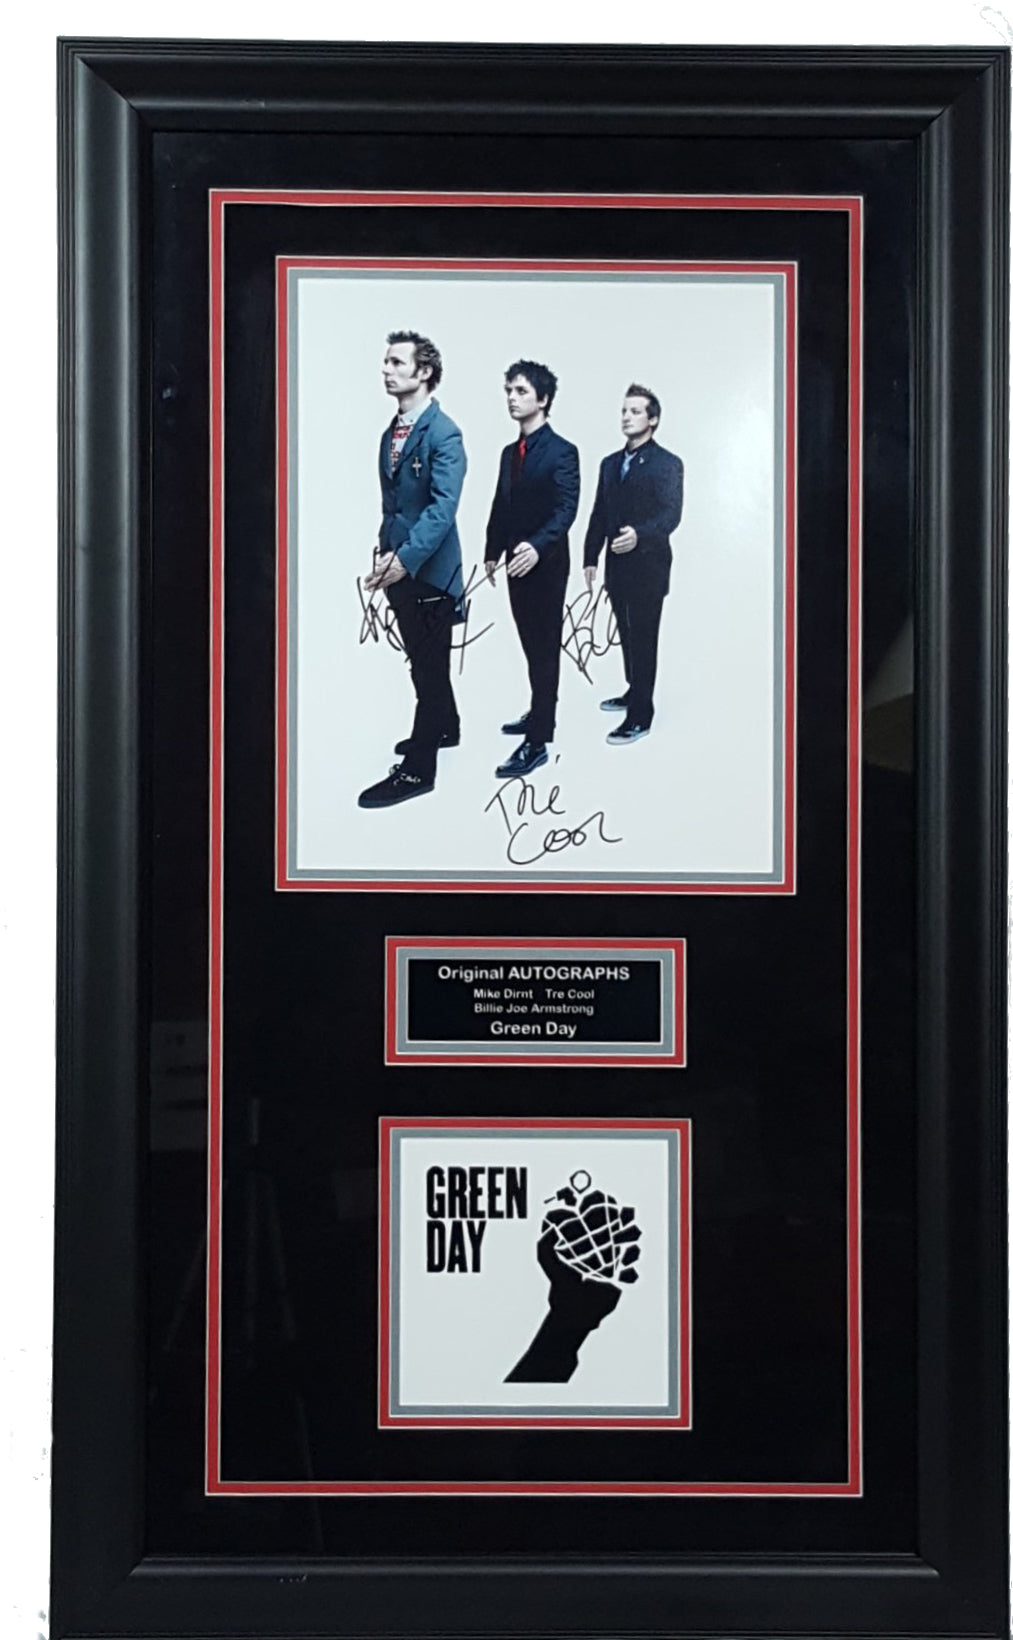 Greenday Autographed 11x14 Framed